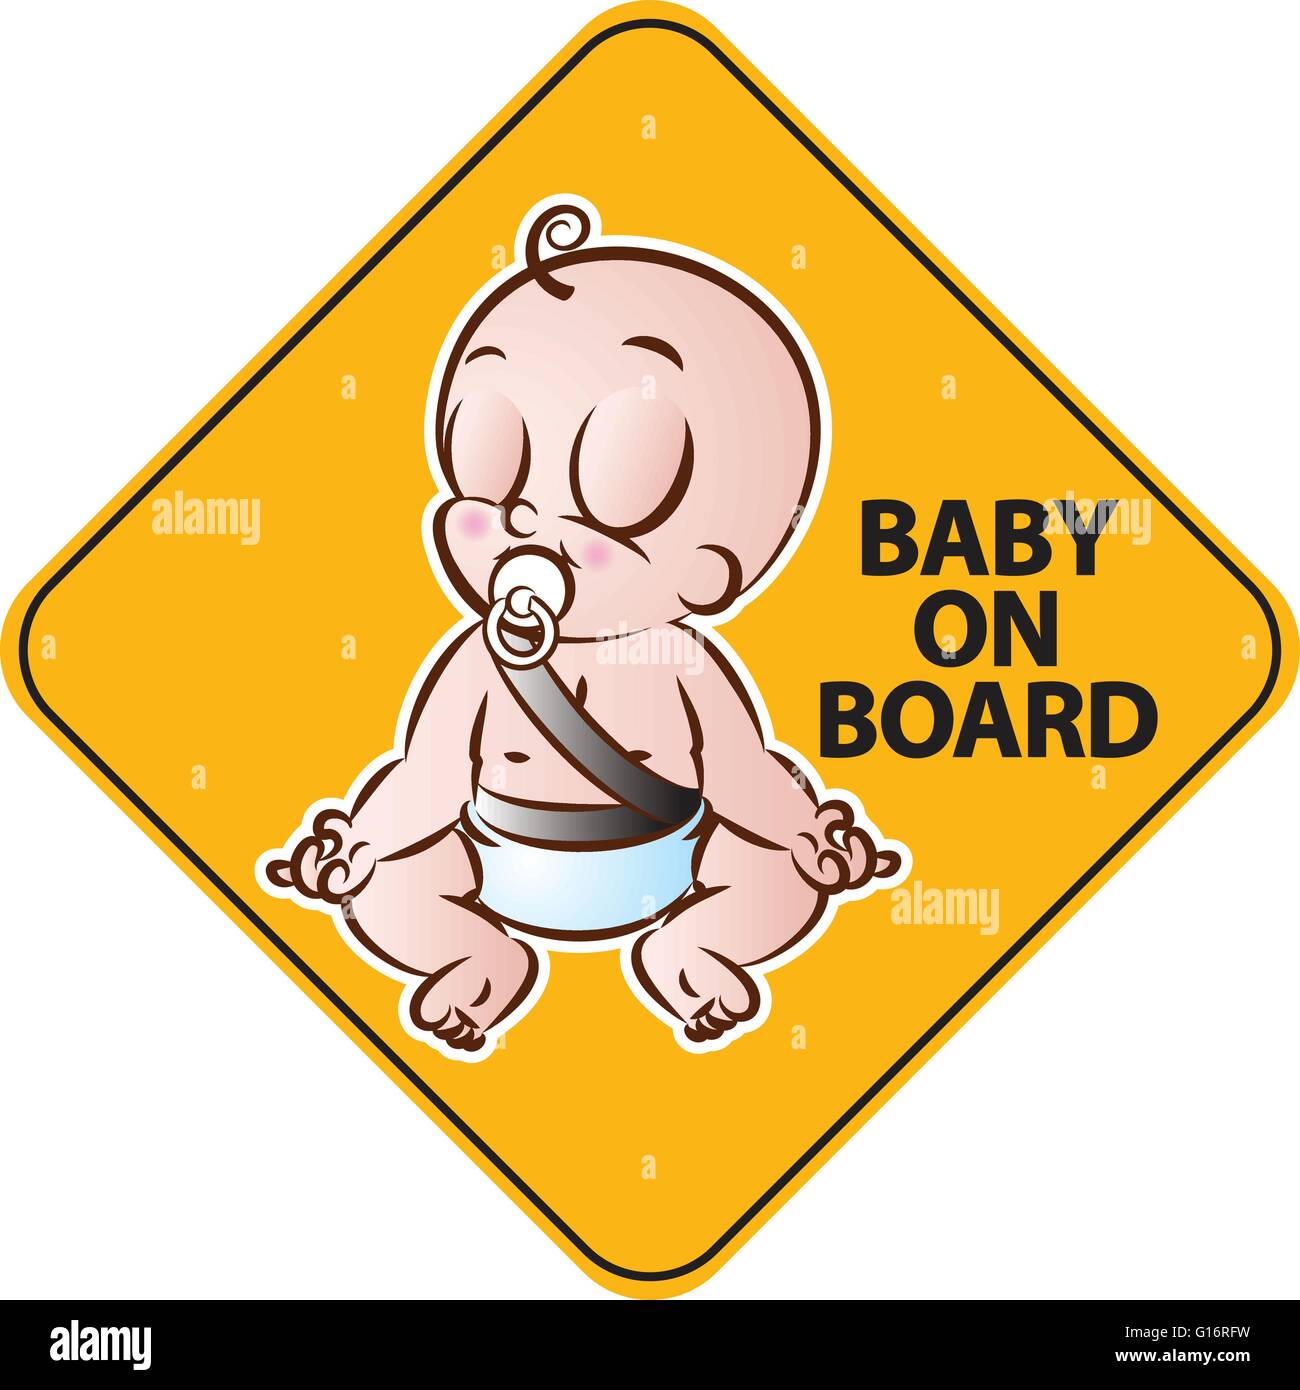 Baby on board car sticker Stock Vector Images - Alamy